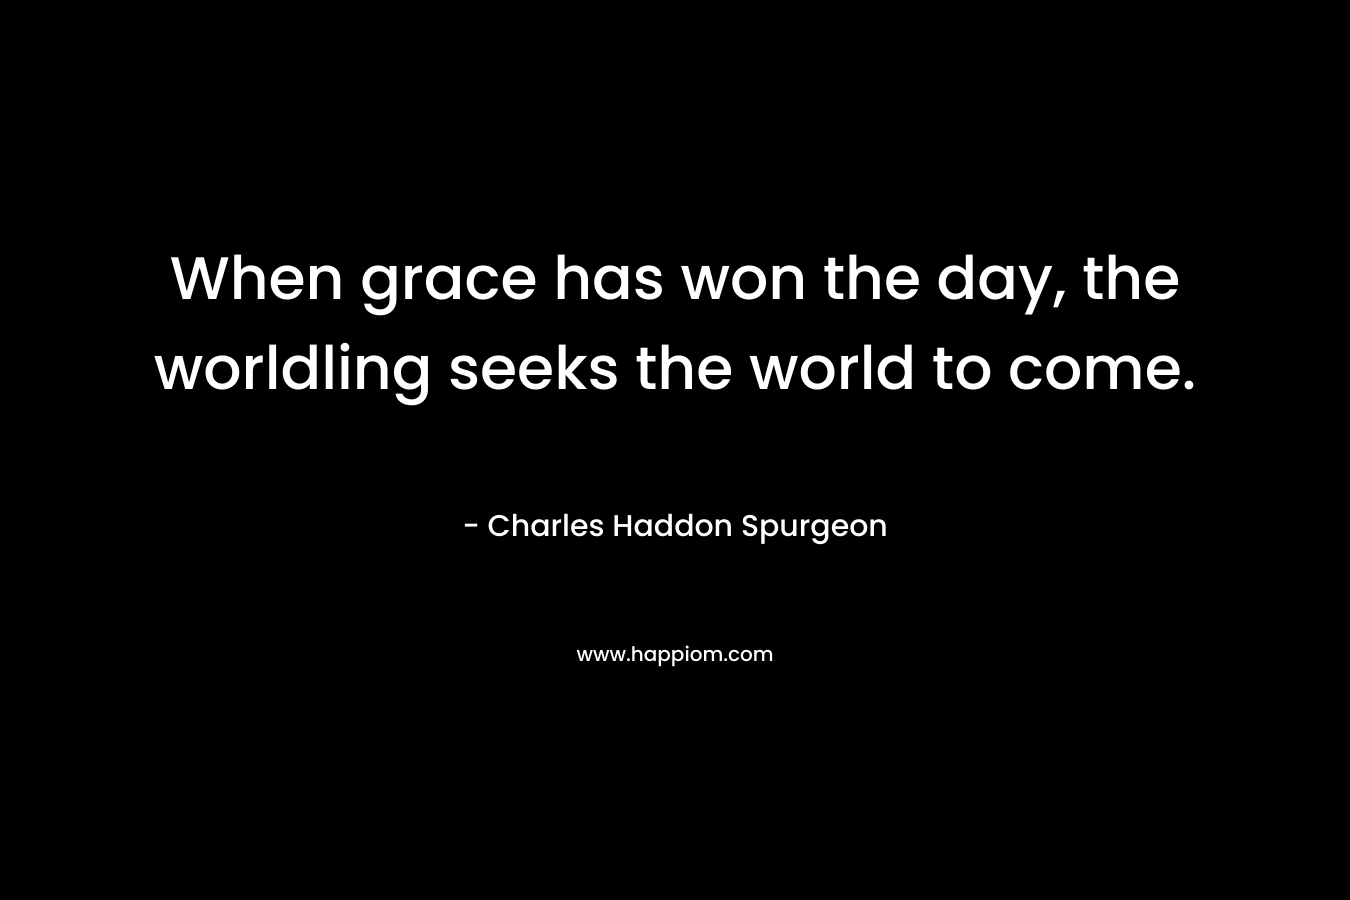 When grace has won the day, the worldling seeks the world to come. – Charles Haddon Spurgeon